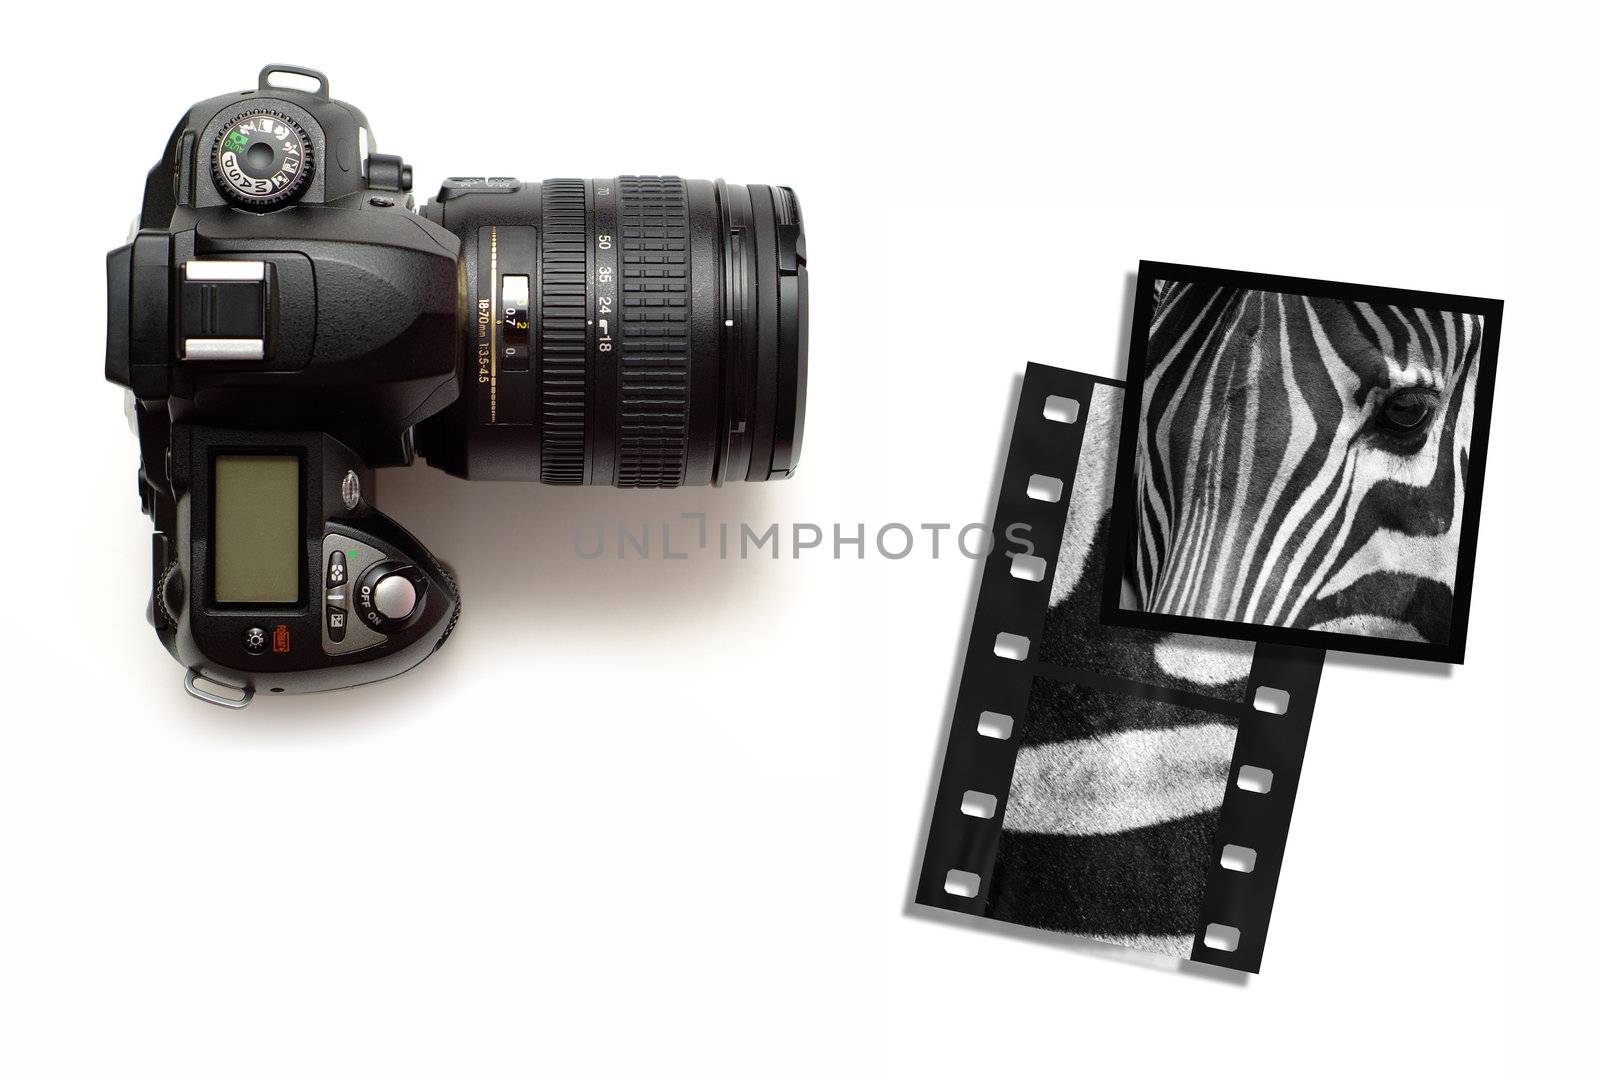 Digital slr or slide 35mm camera by alistaircotton